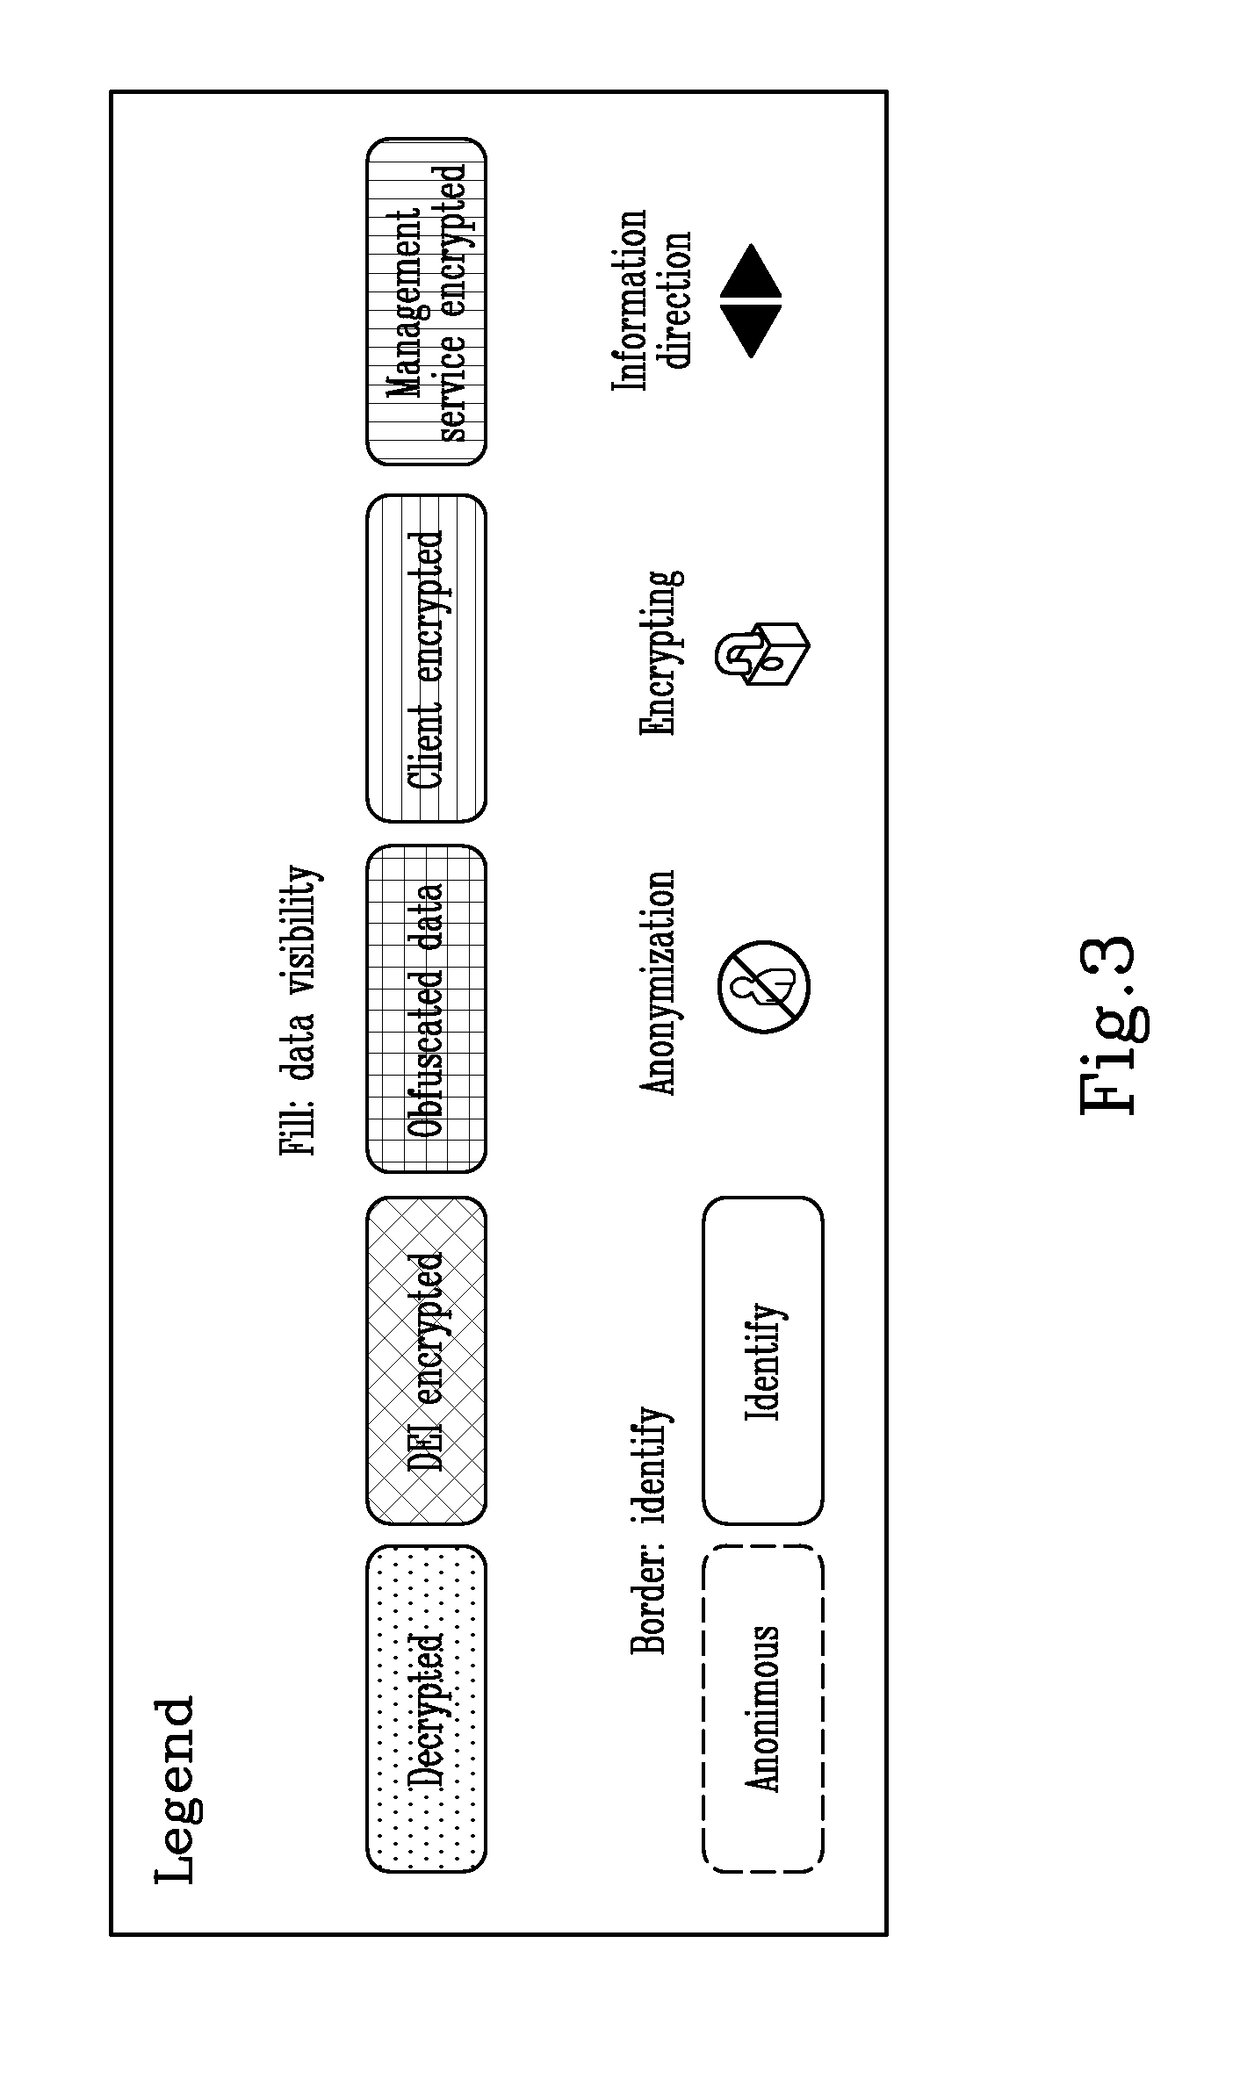 System and method for the management of personal data relative to a user by maintaining personal privacy